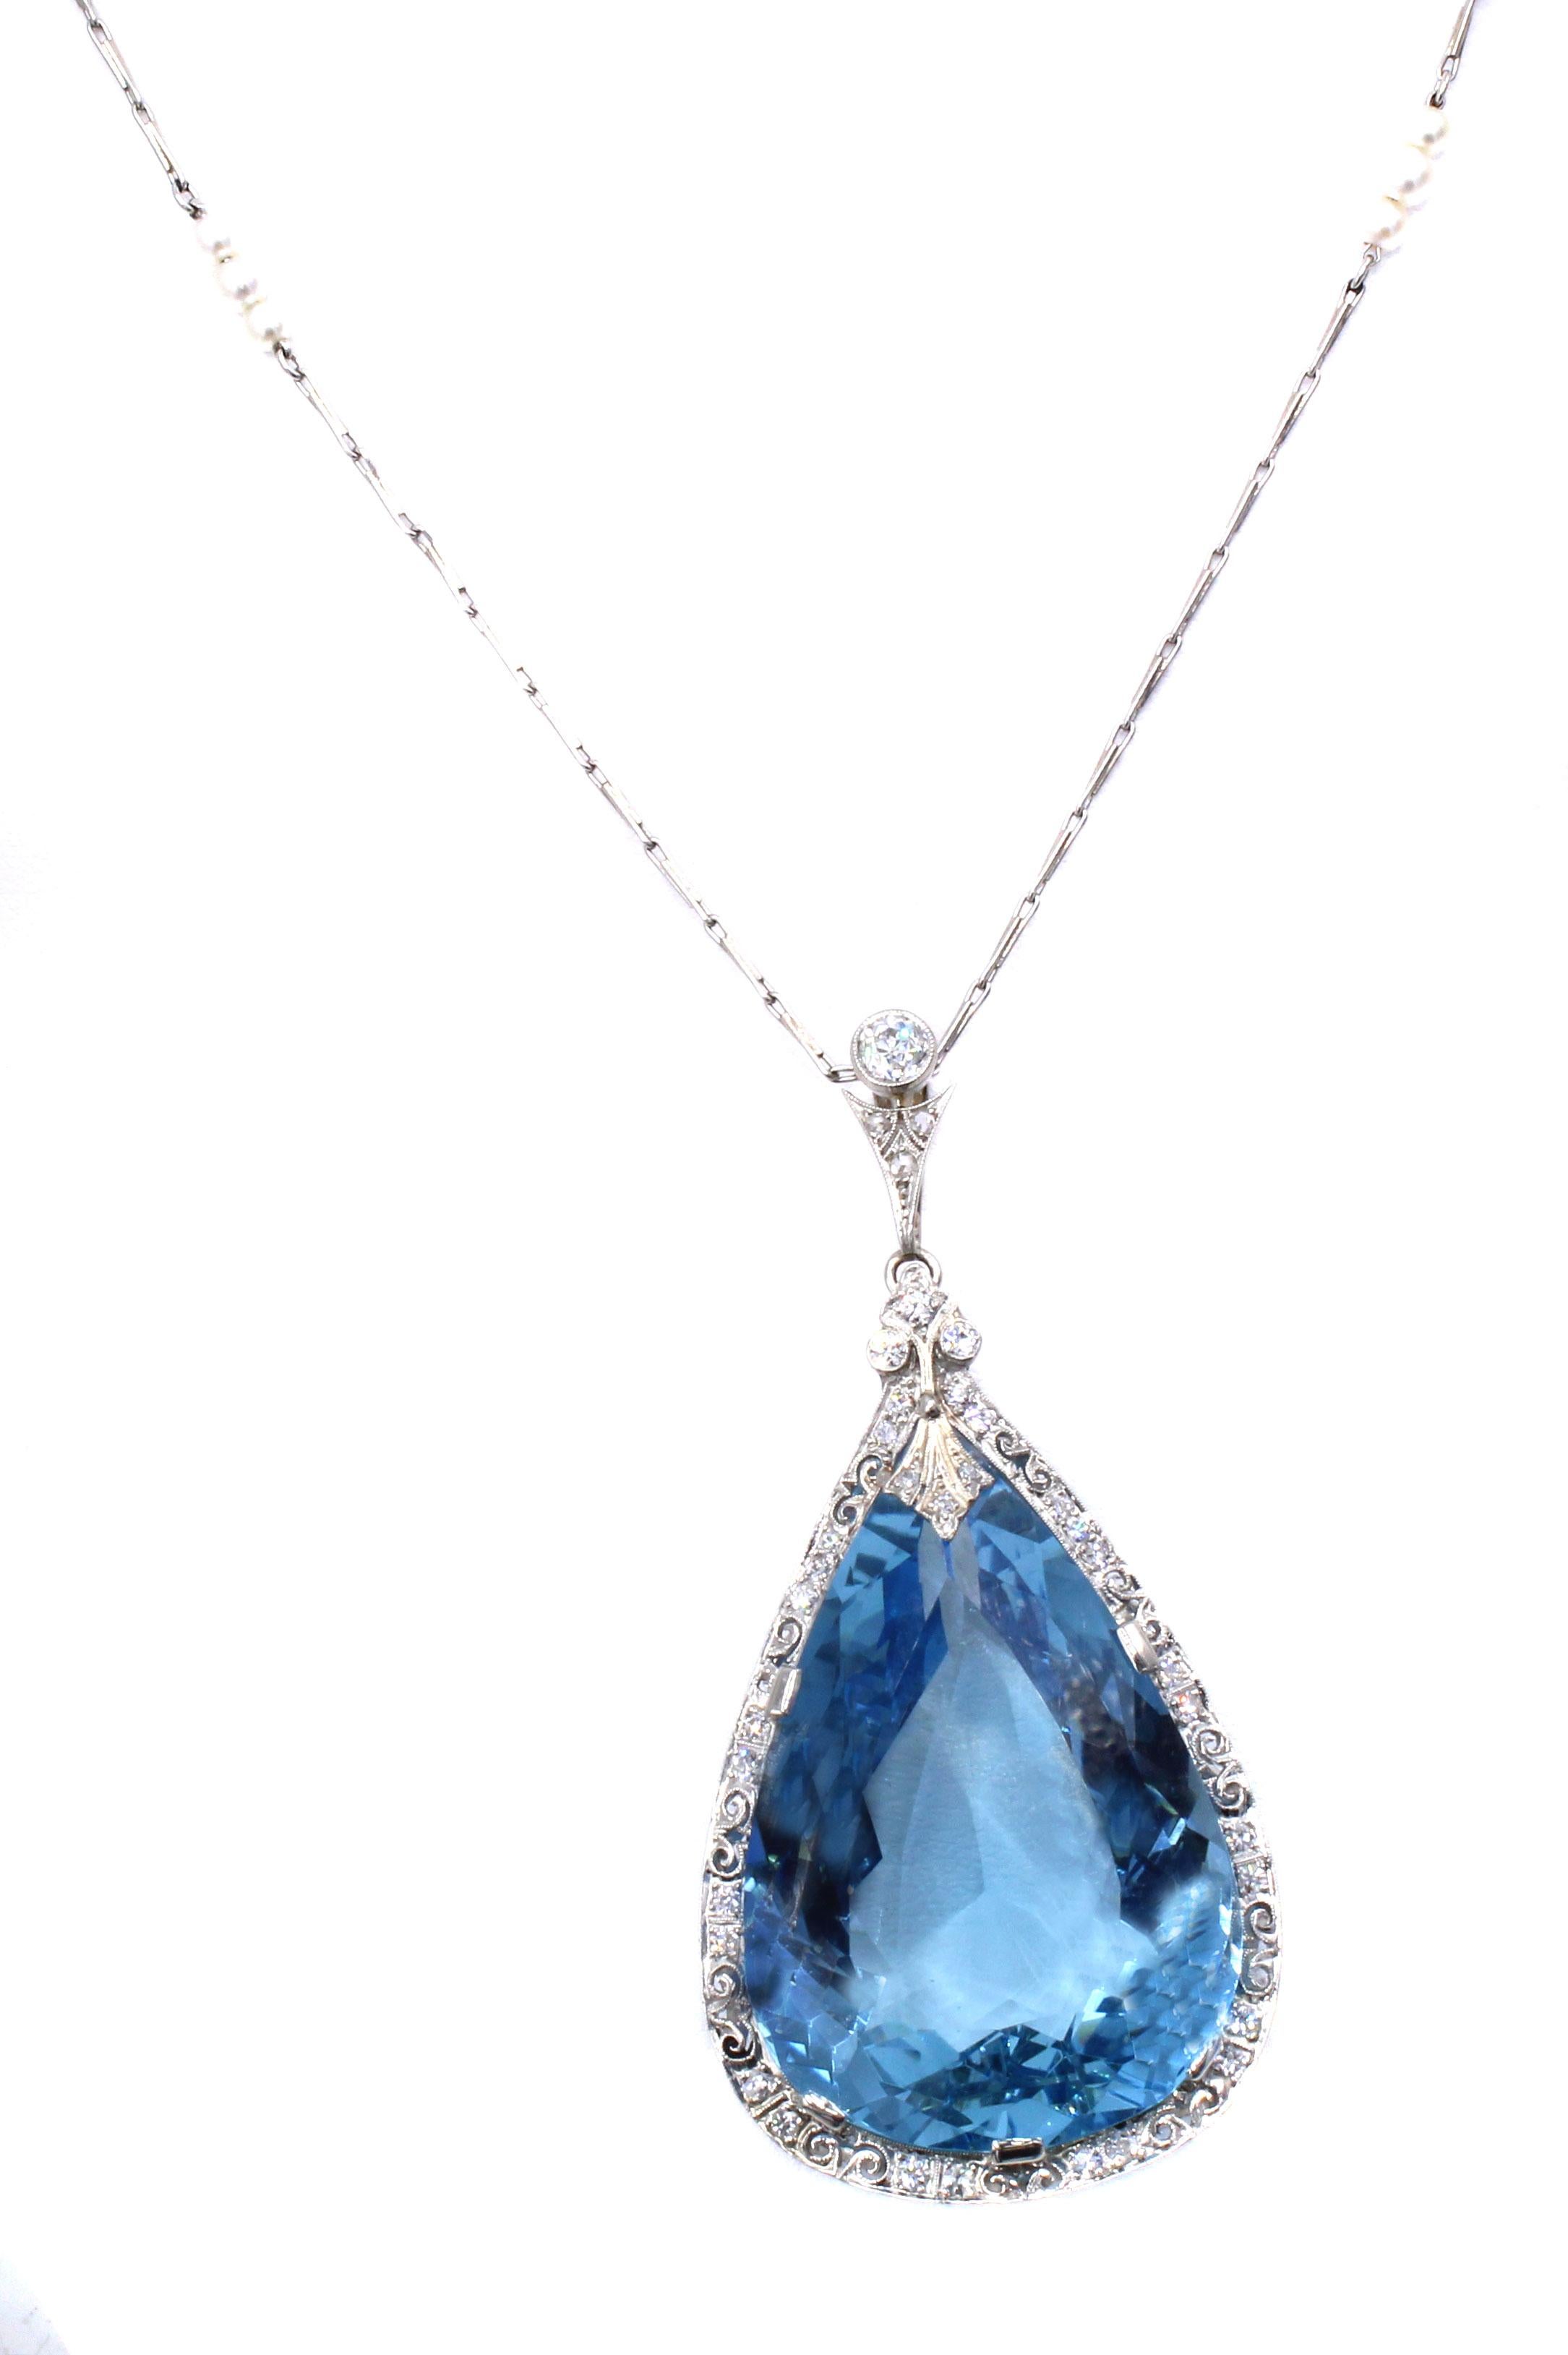 This unique piece of Edwardian jewelry from ca 1915 features an exceptional 64.05 carat Santa Maria color aquamarine set in a wonderful platinum and diamond pendant, extended from a platinum chain. The perfectly cut and proportioned gemstone